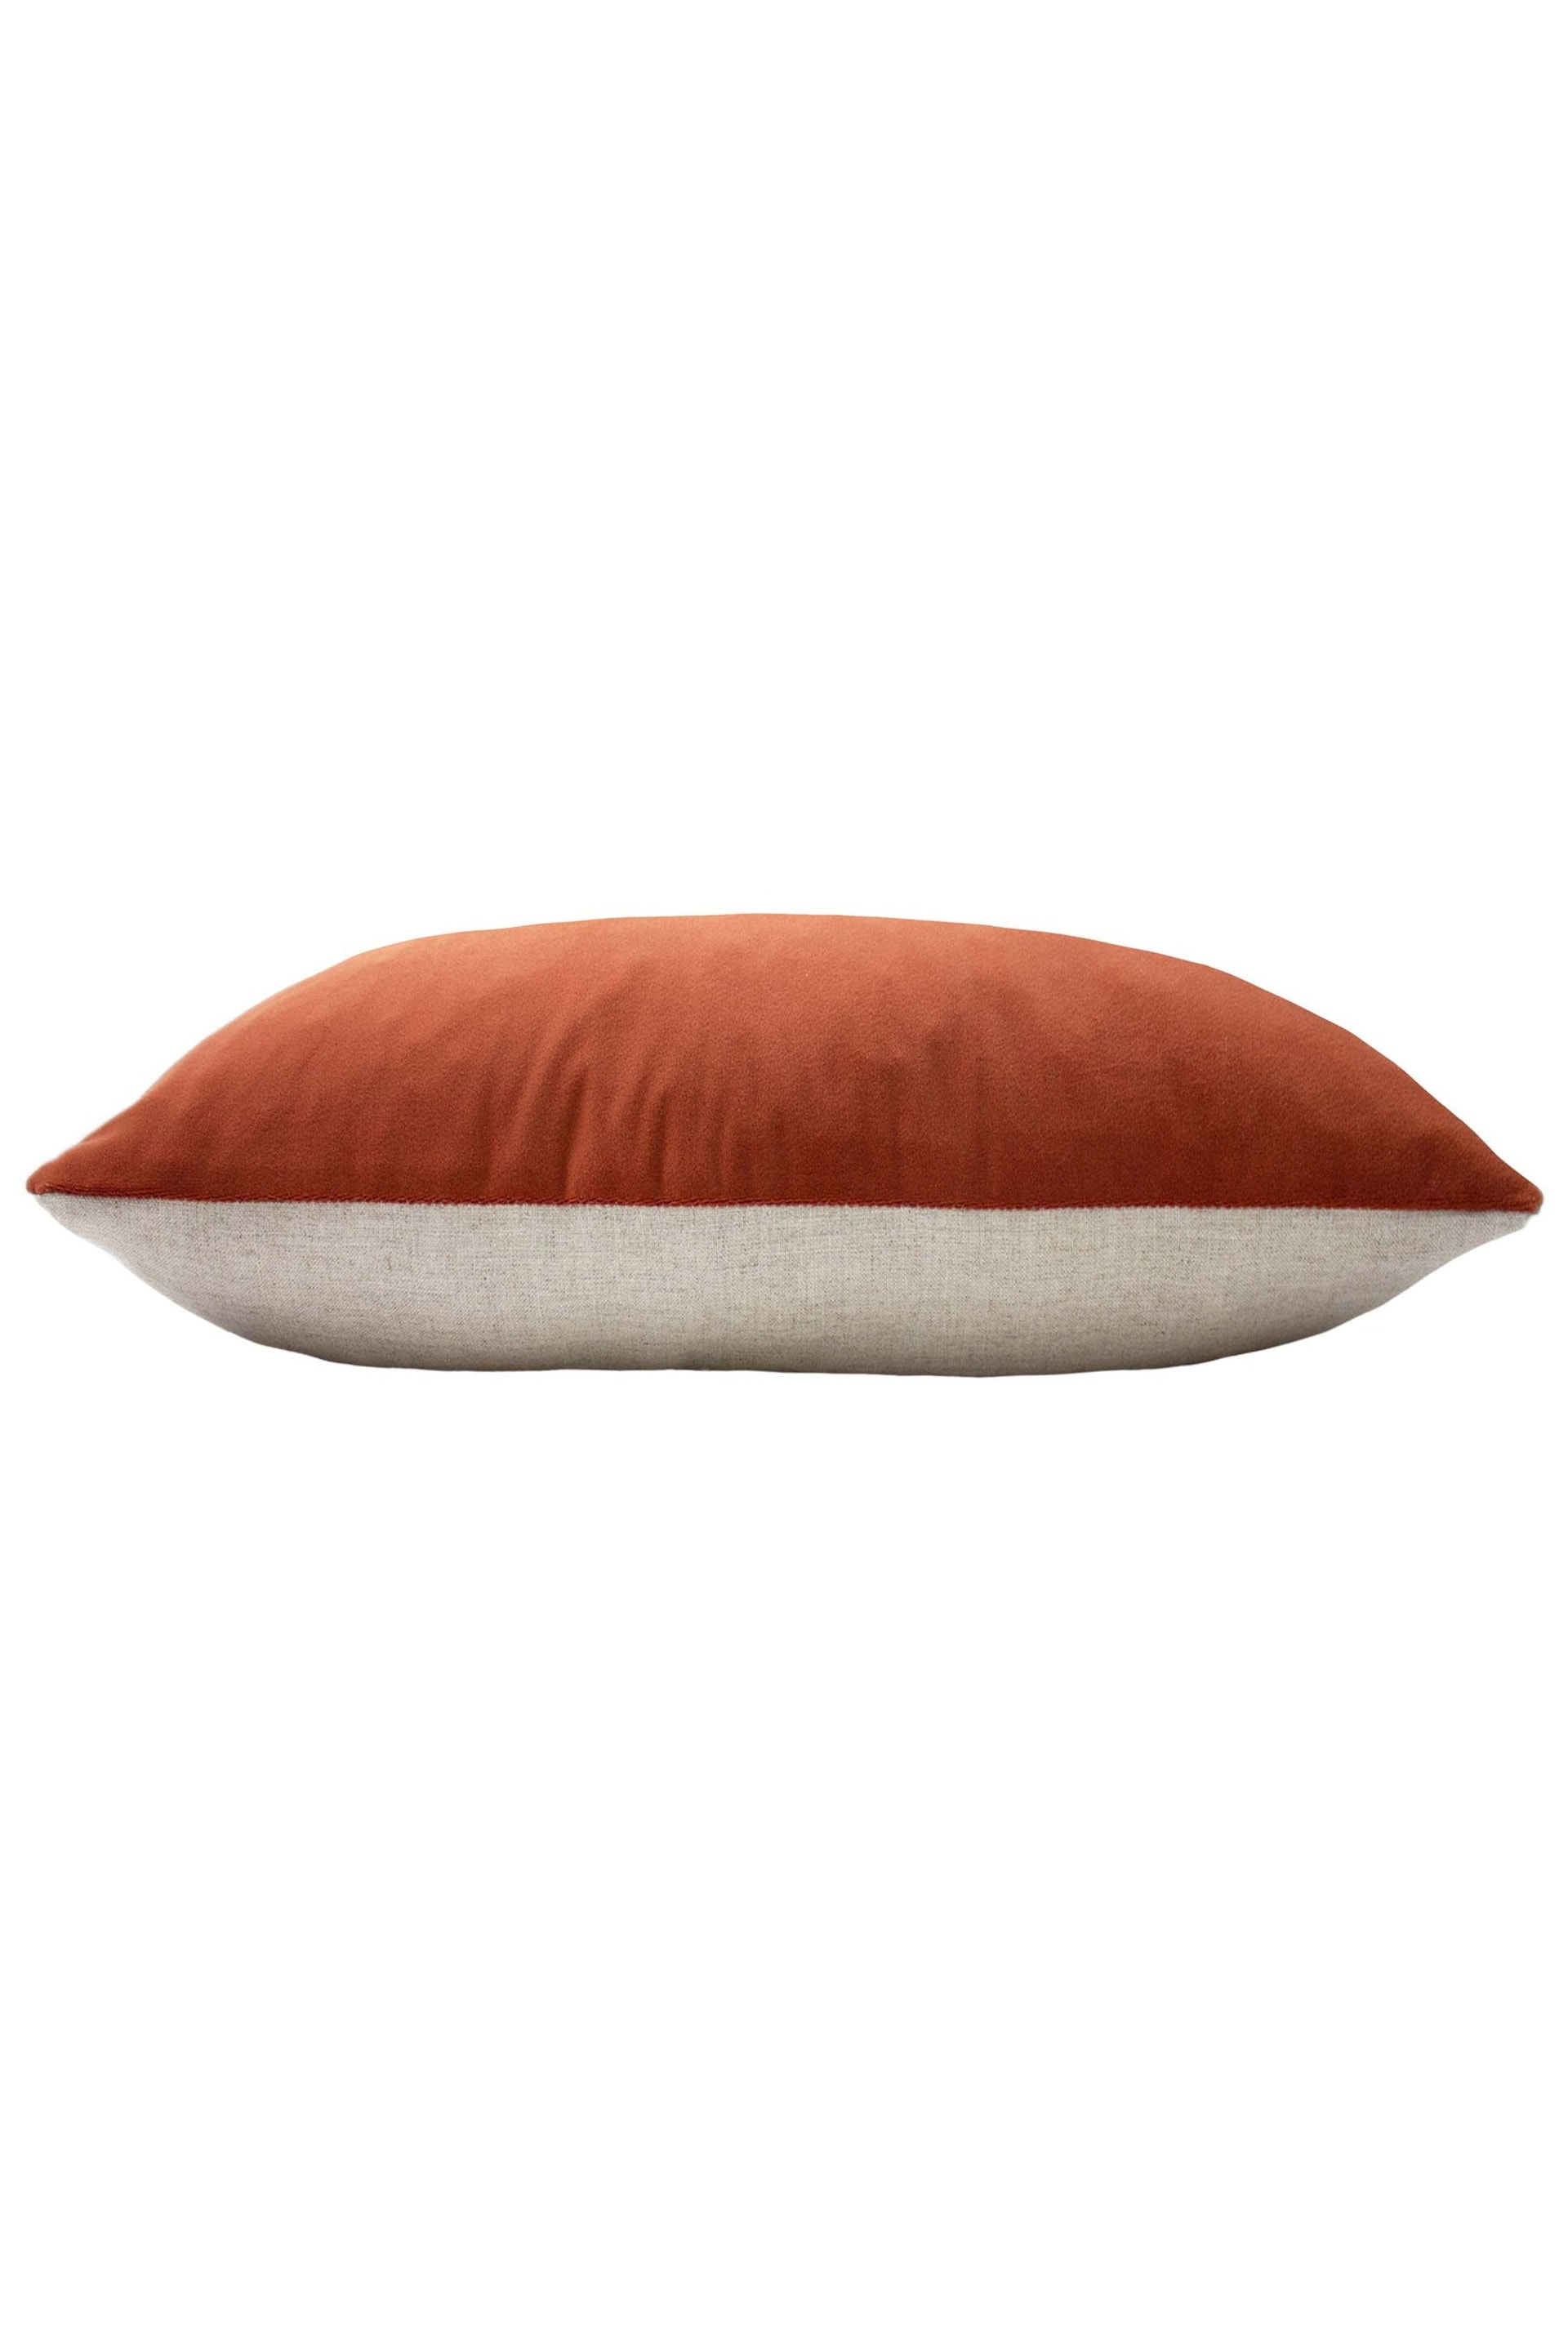 furn. 2 Pack Orange Contra Filled Cushions - Image 3 of 4